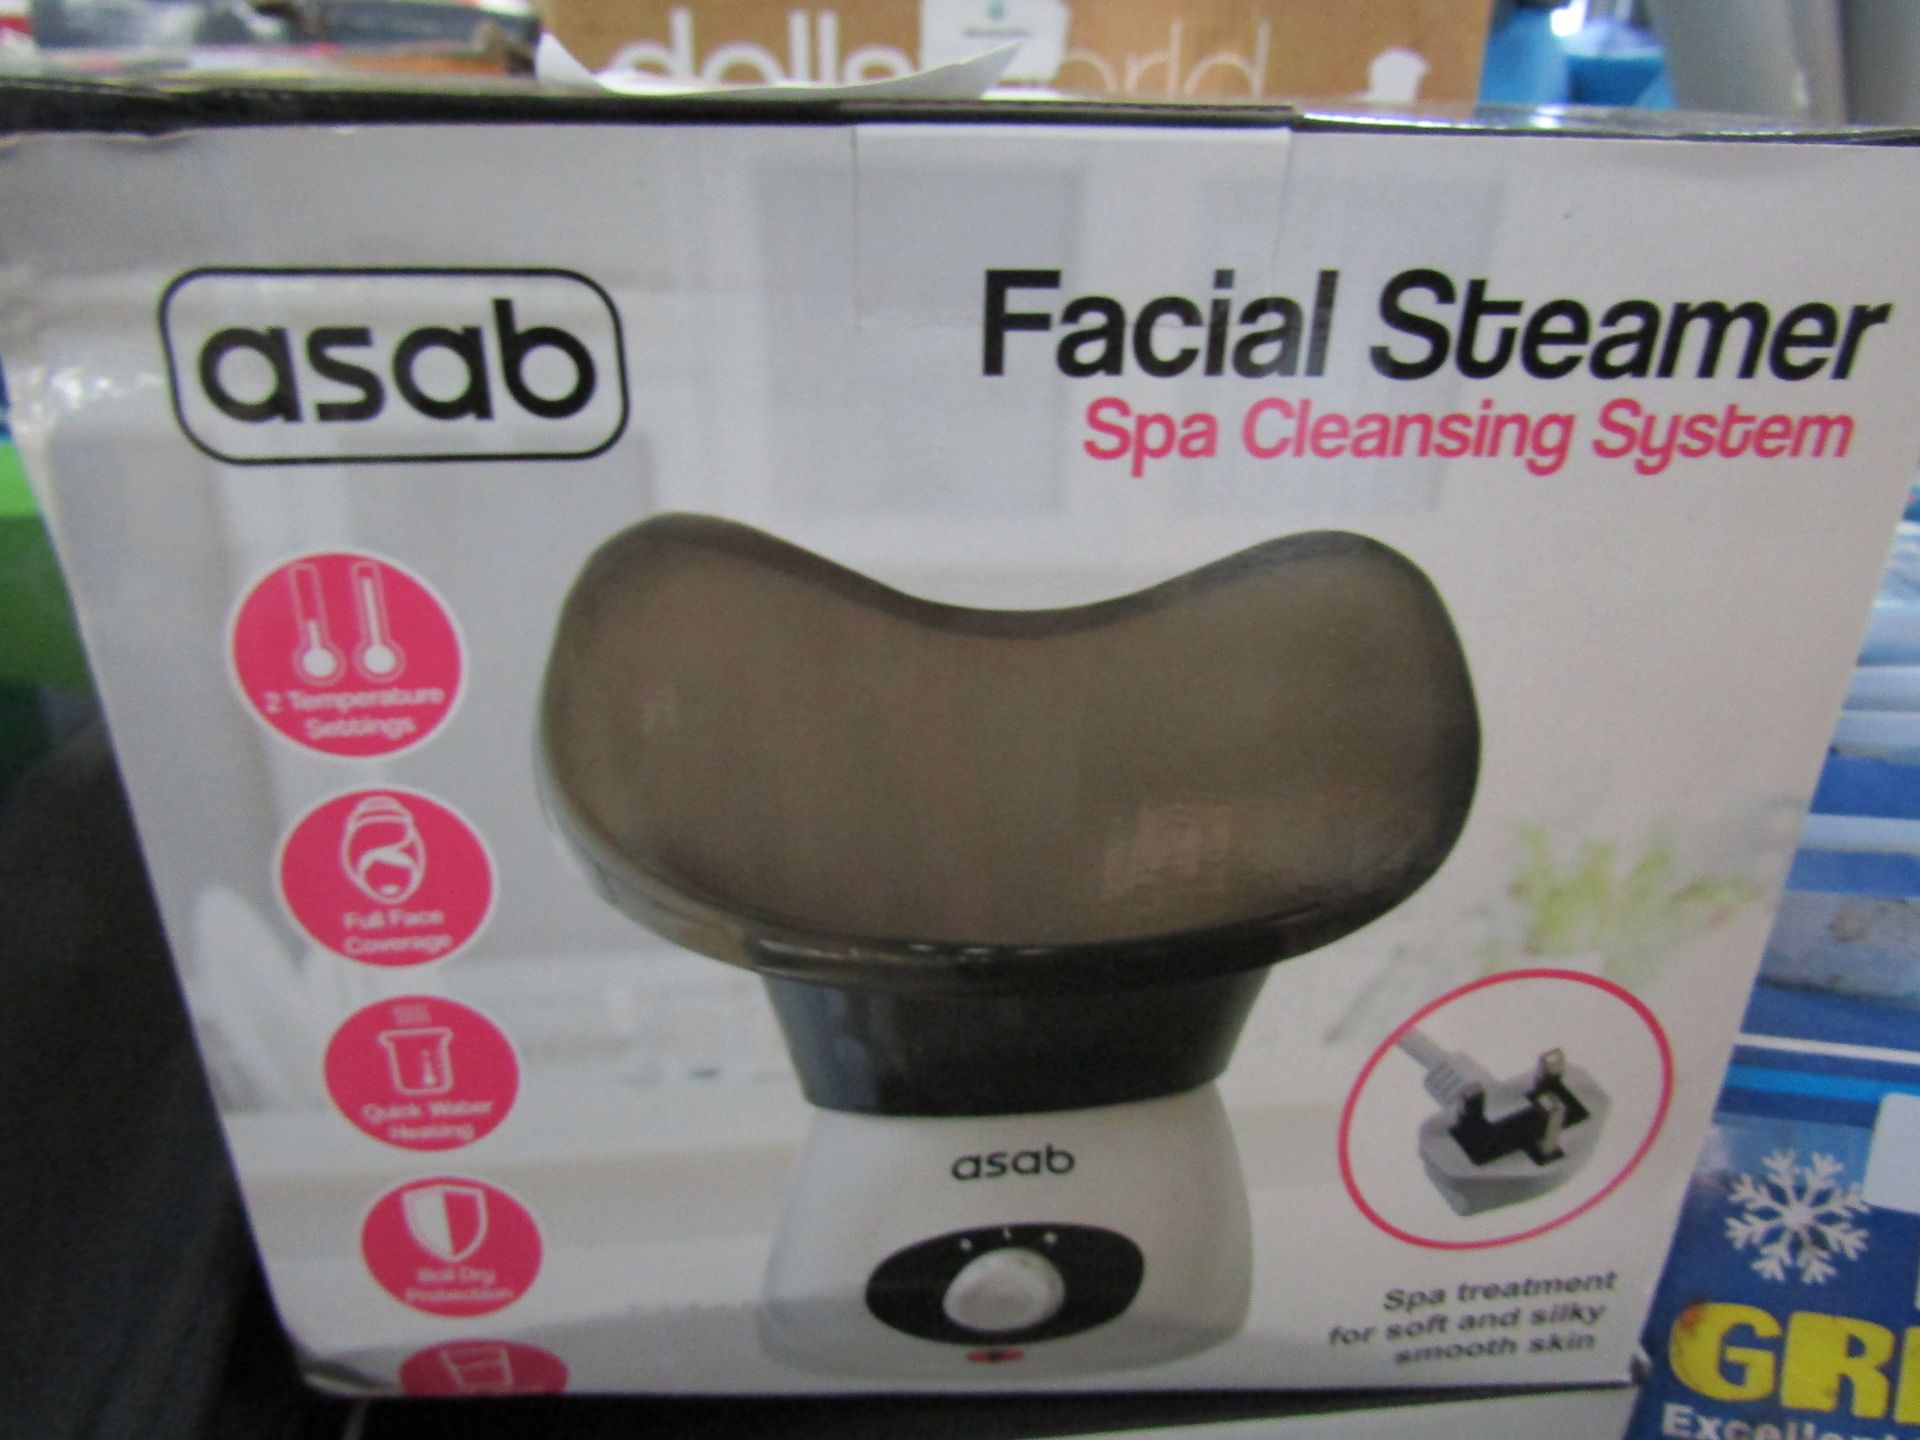 Asab - Facial Steamer Spa Cleansing System - Unchecked & Boxed.